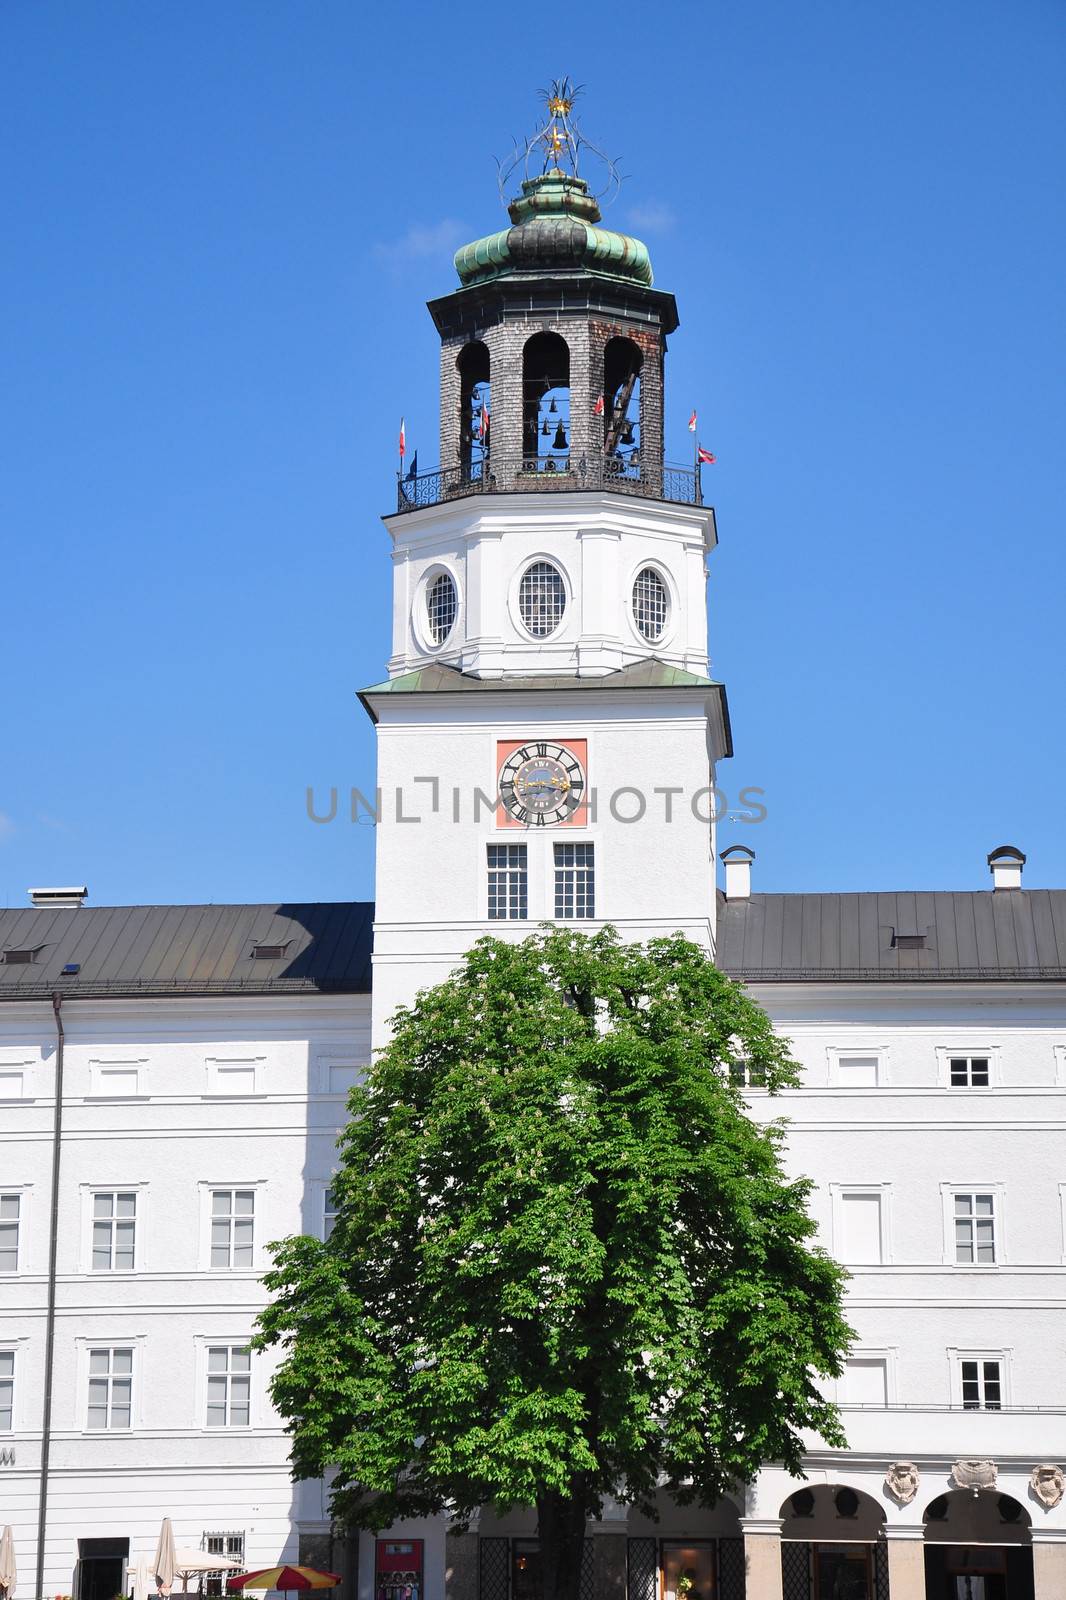 Carillon tower of New Residence in Salzburg by rbiedermann